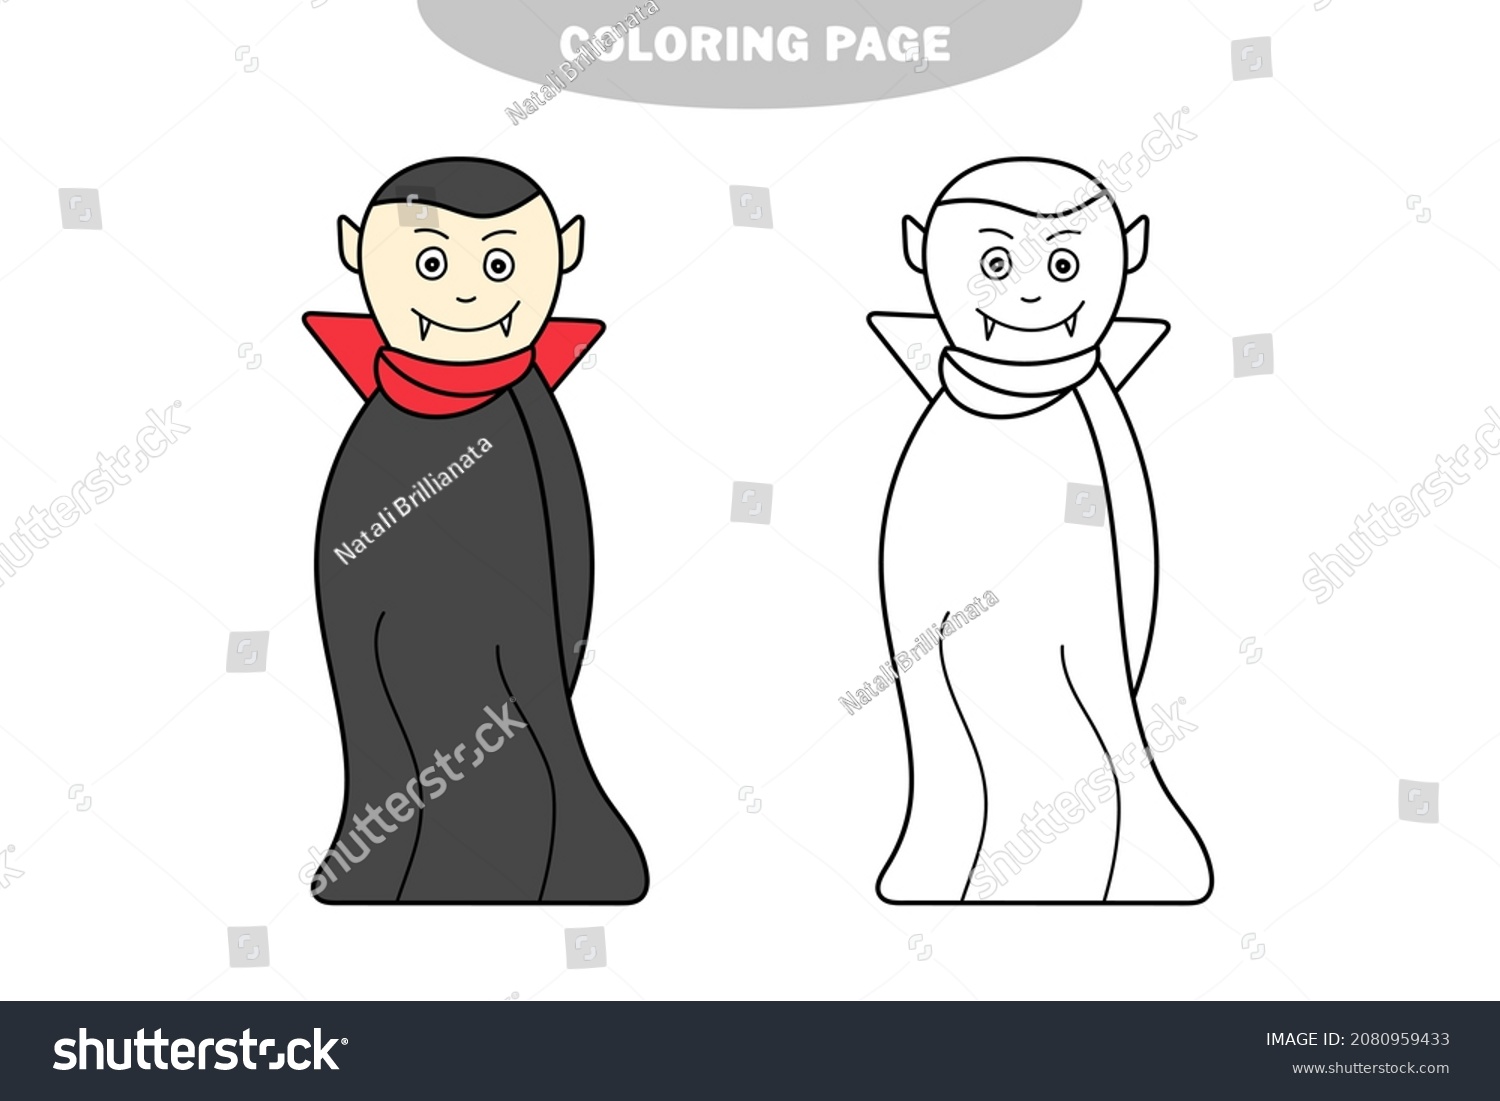 Simple coloring page coloring page vampire stock vector royalty free